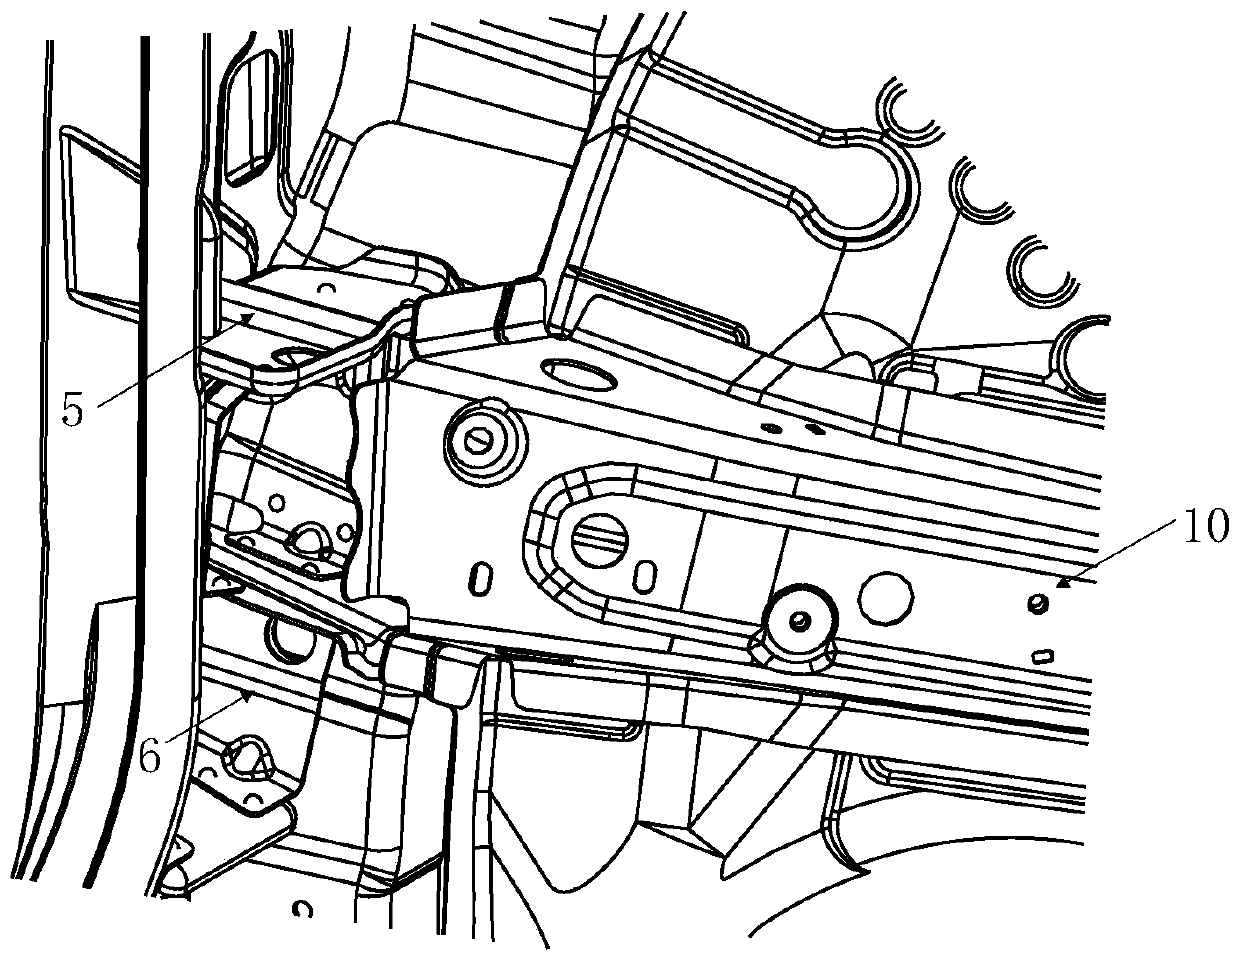 Vehicle front pillar assembly and automobile